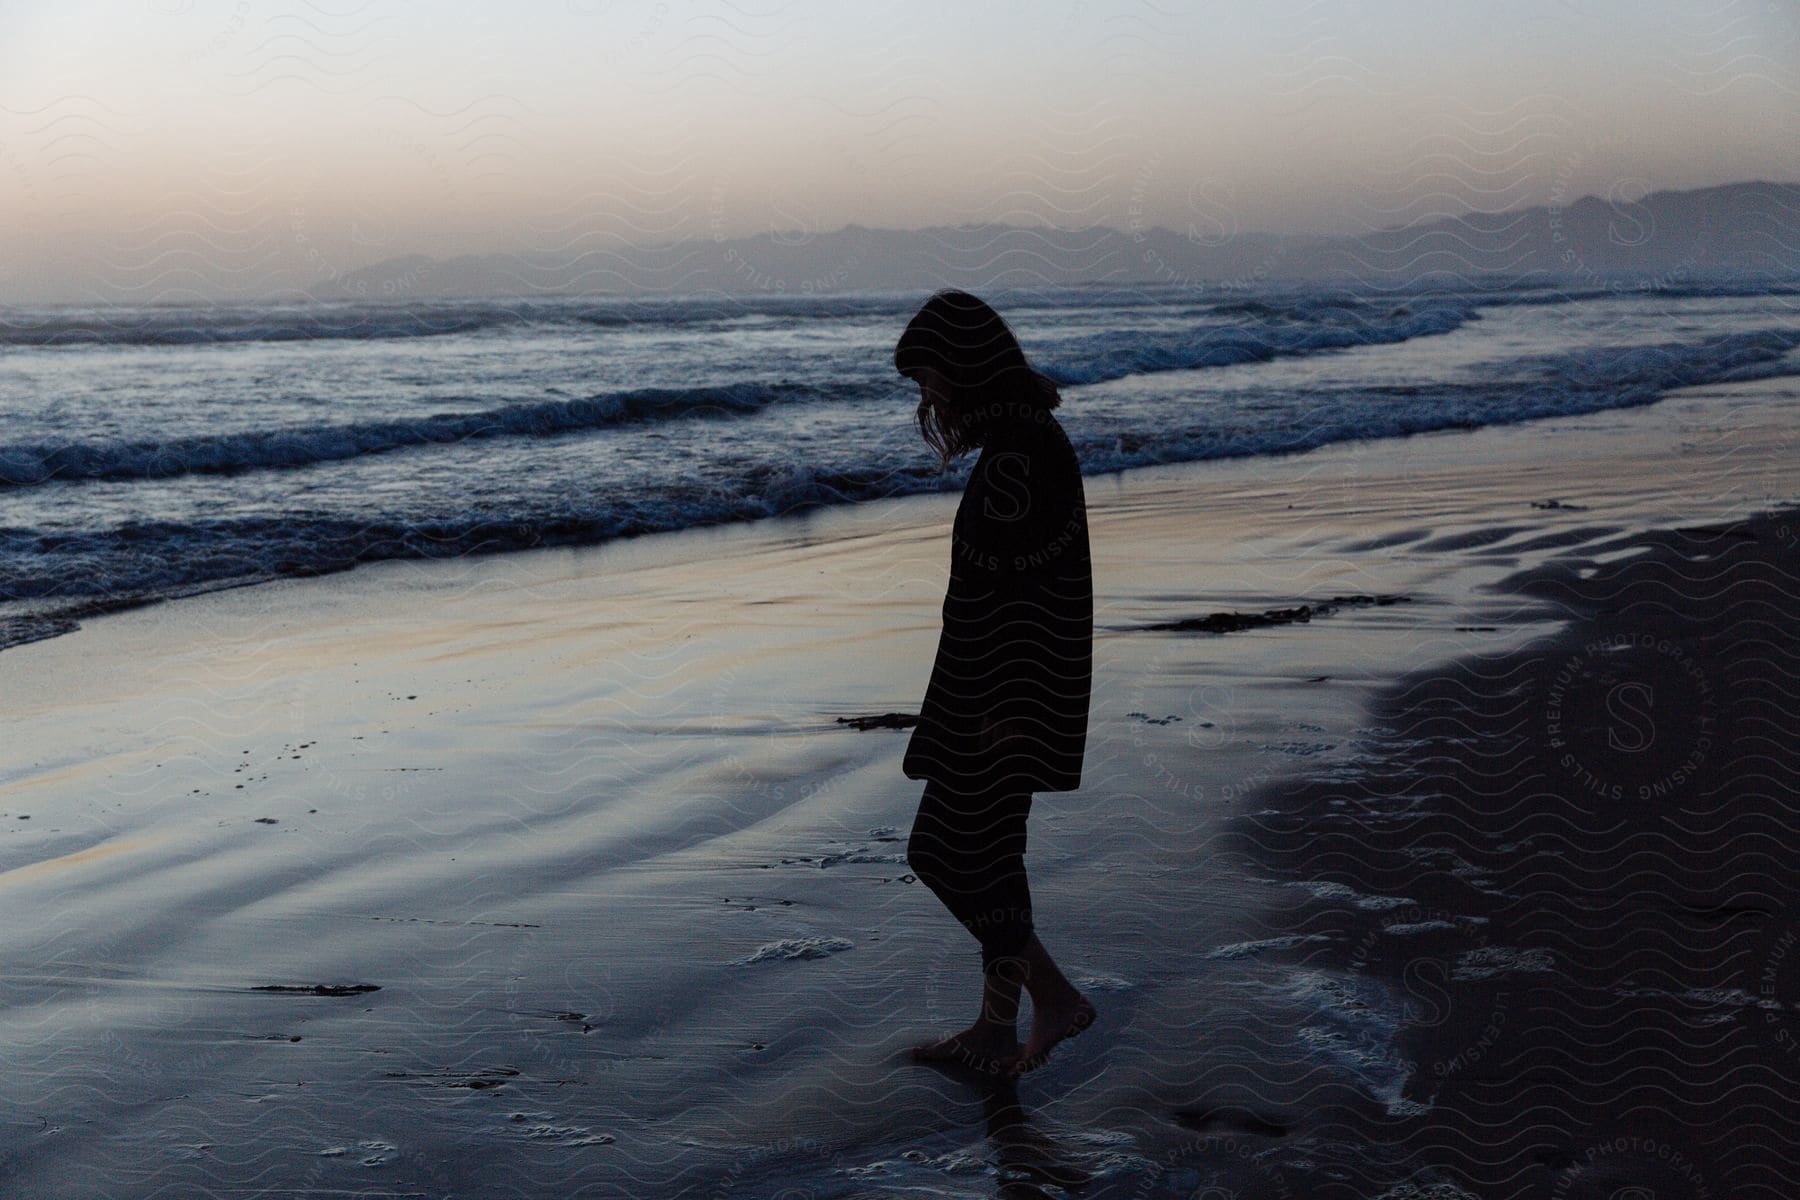 Silhouette of woman walking barefoot on beach with waves rolling into shore mountains in distance under hazy sky